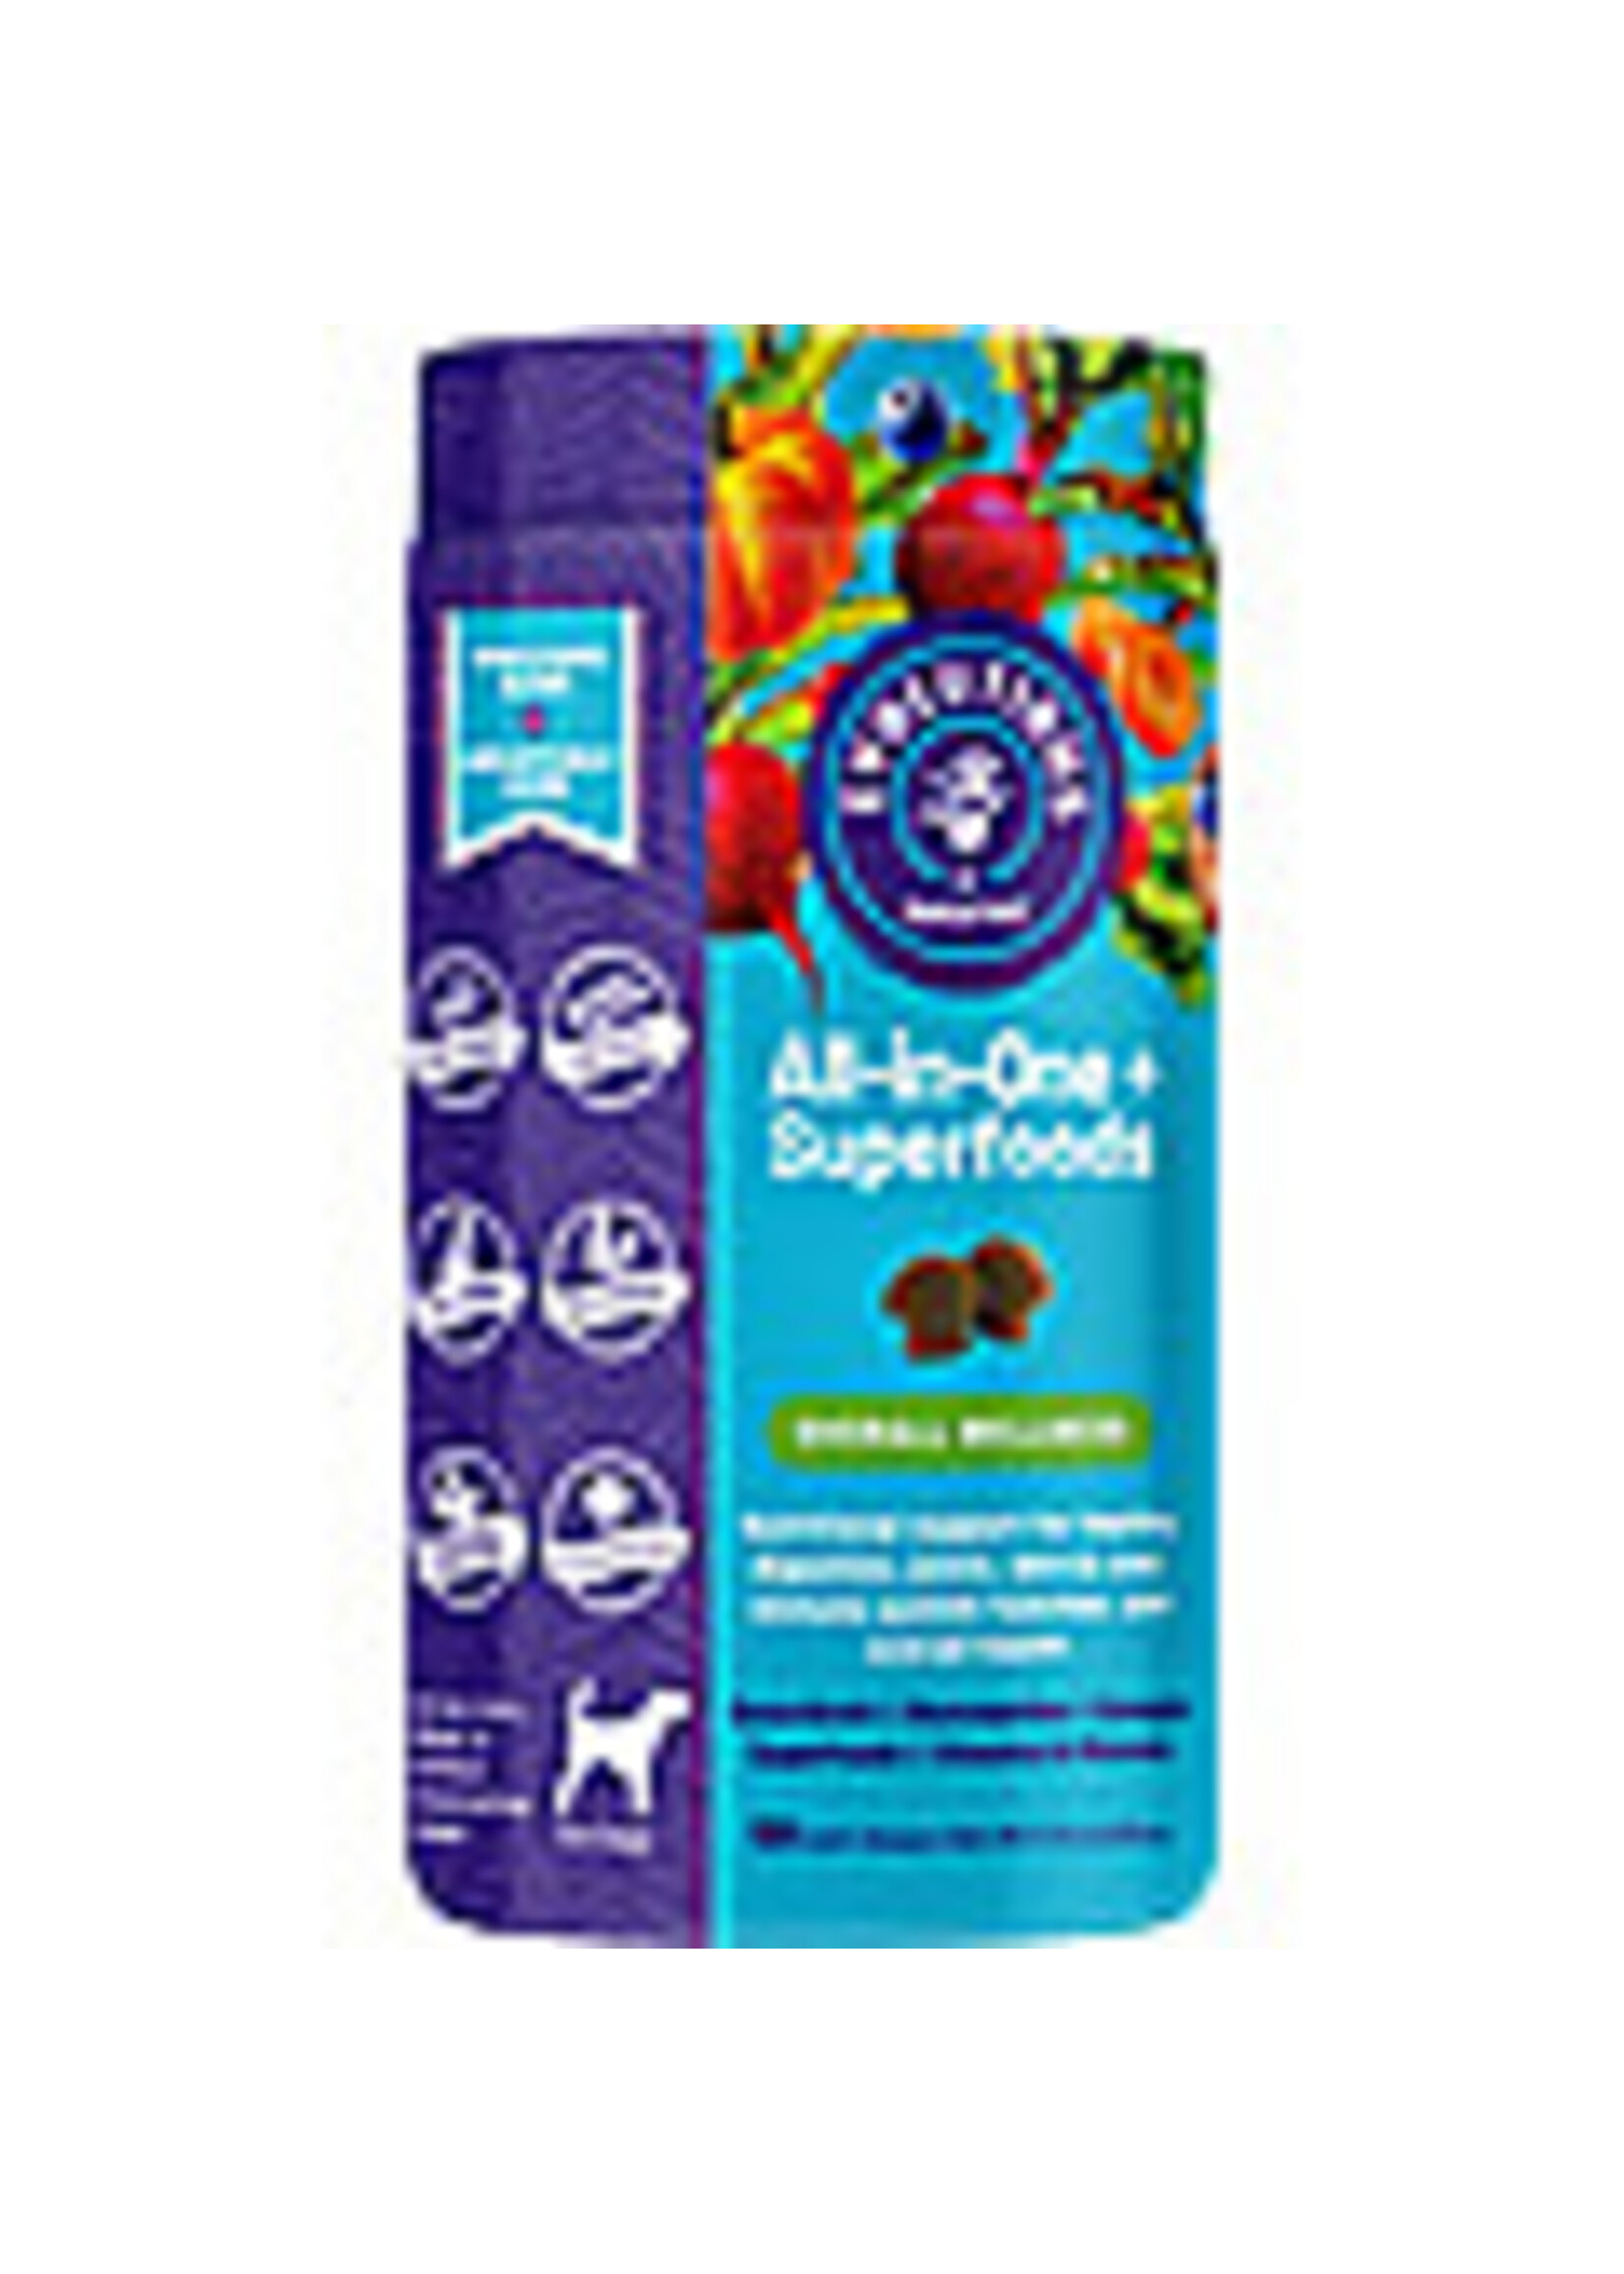 NaturVet NaturVet Evolutions All-in-One + Superfoods Overall Wellness Soft Chew 90ct